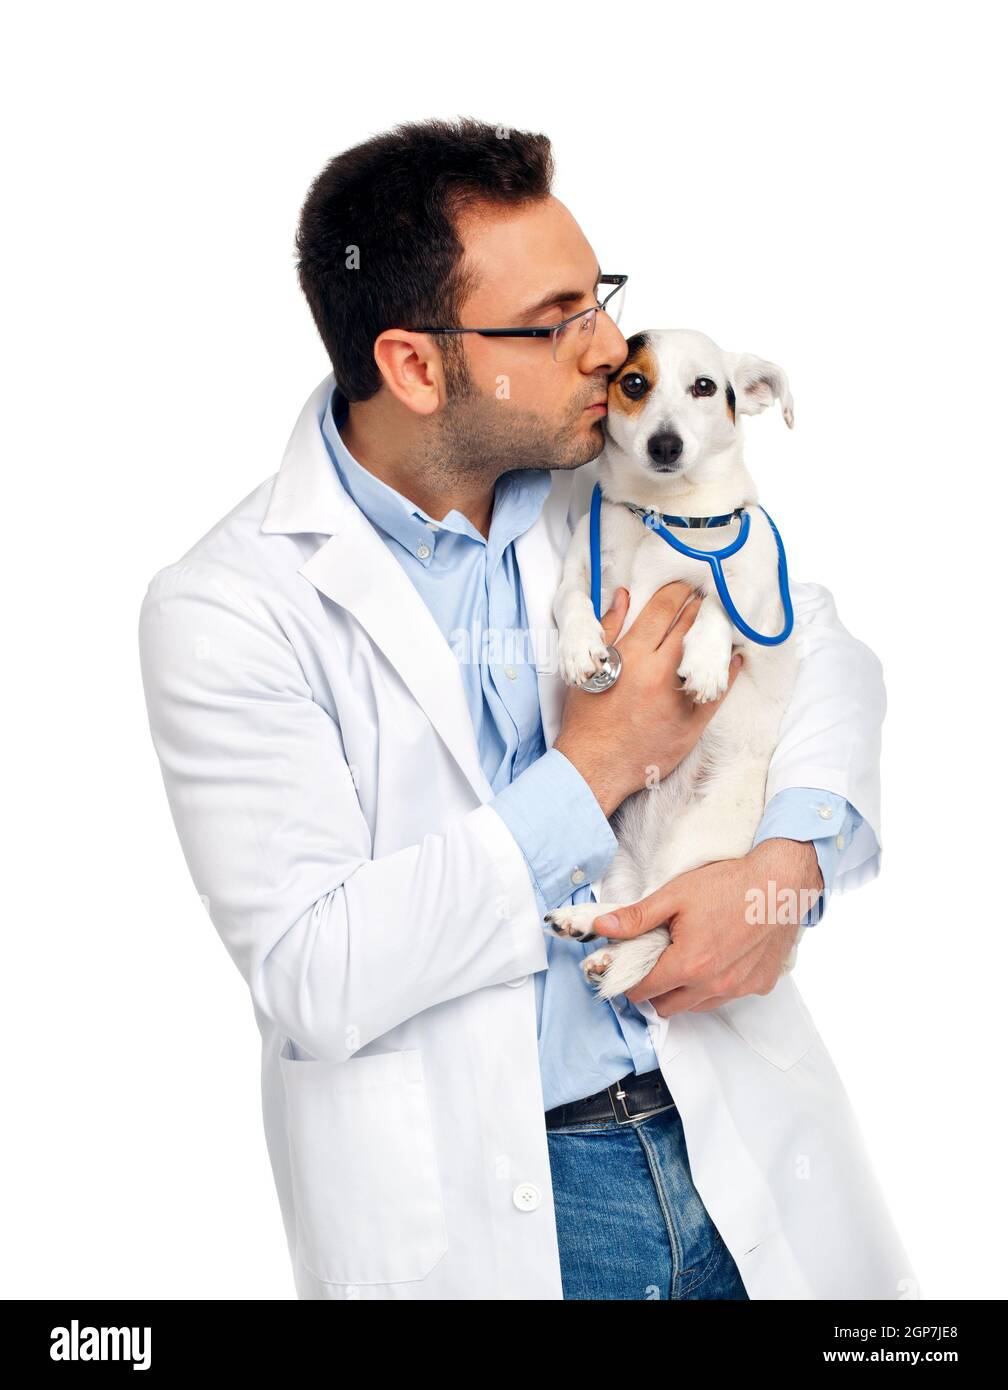 Veterinarian doctor with jack russell isolated on white Stock Photo